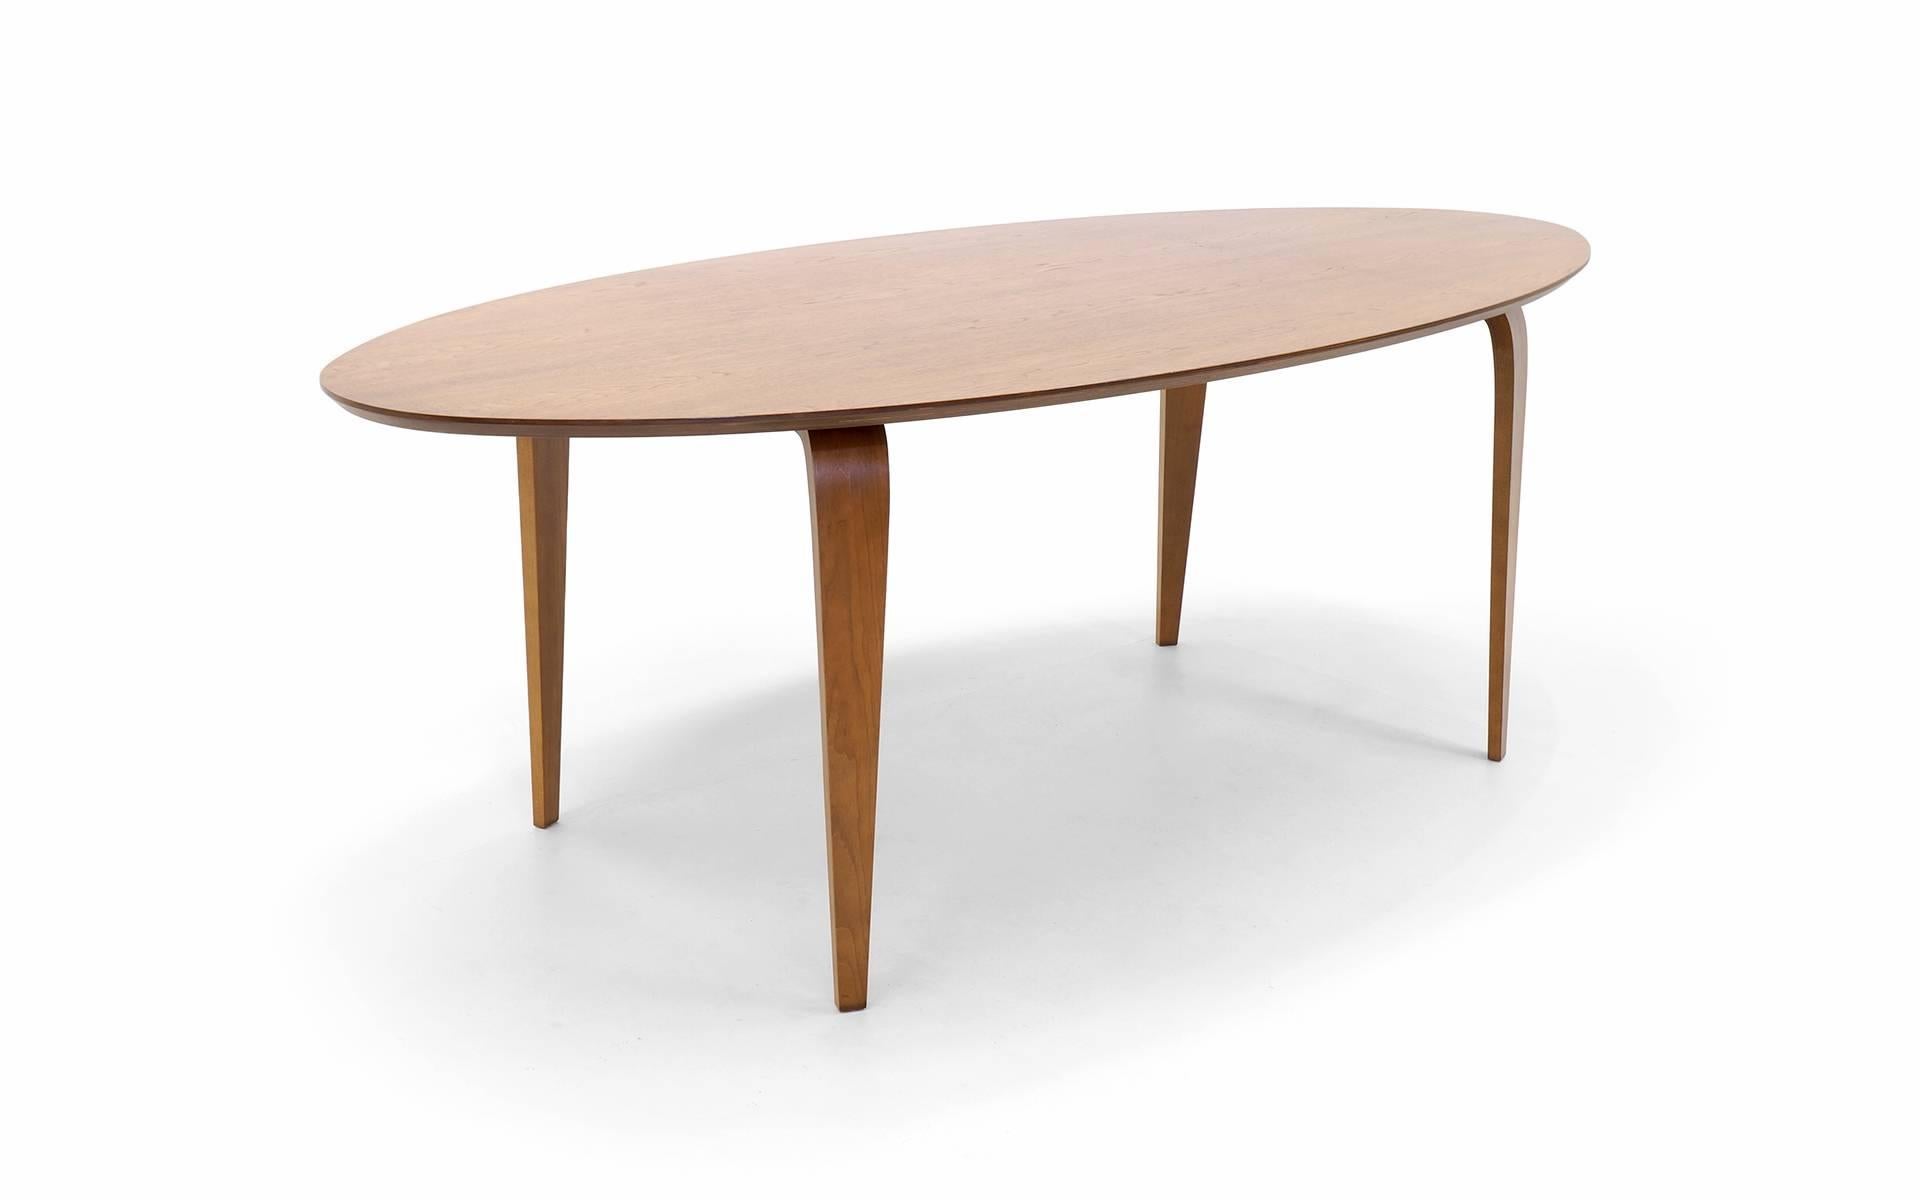 Oval dining table designed by Norman Cherner. Recent production in very good condition.